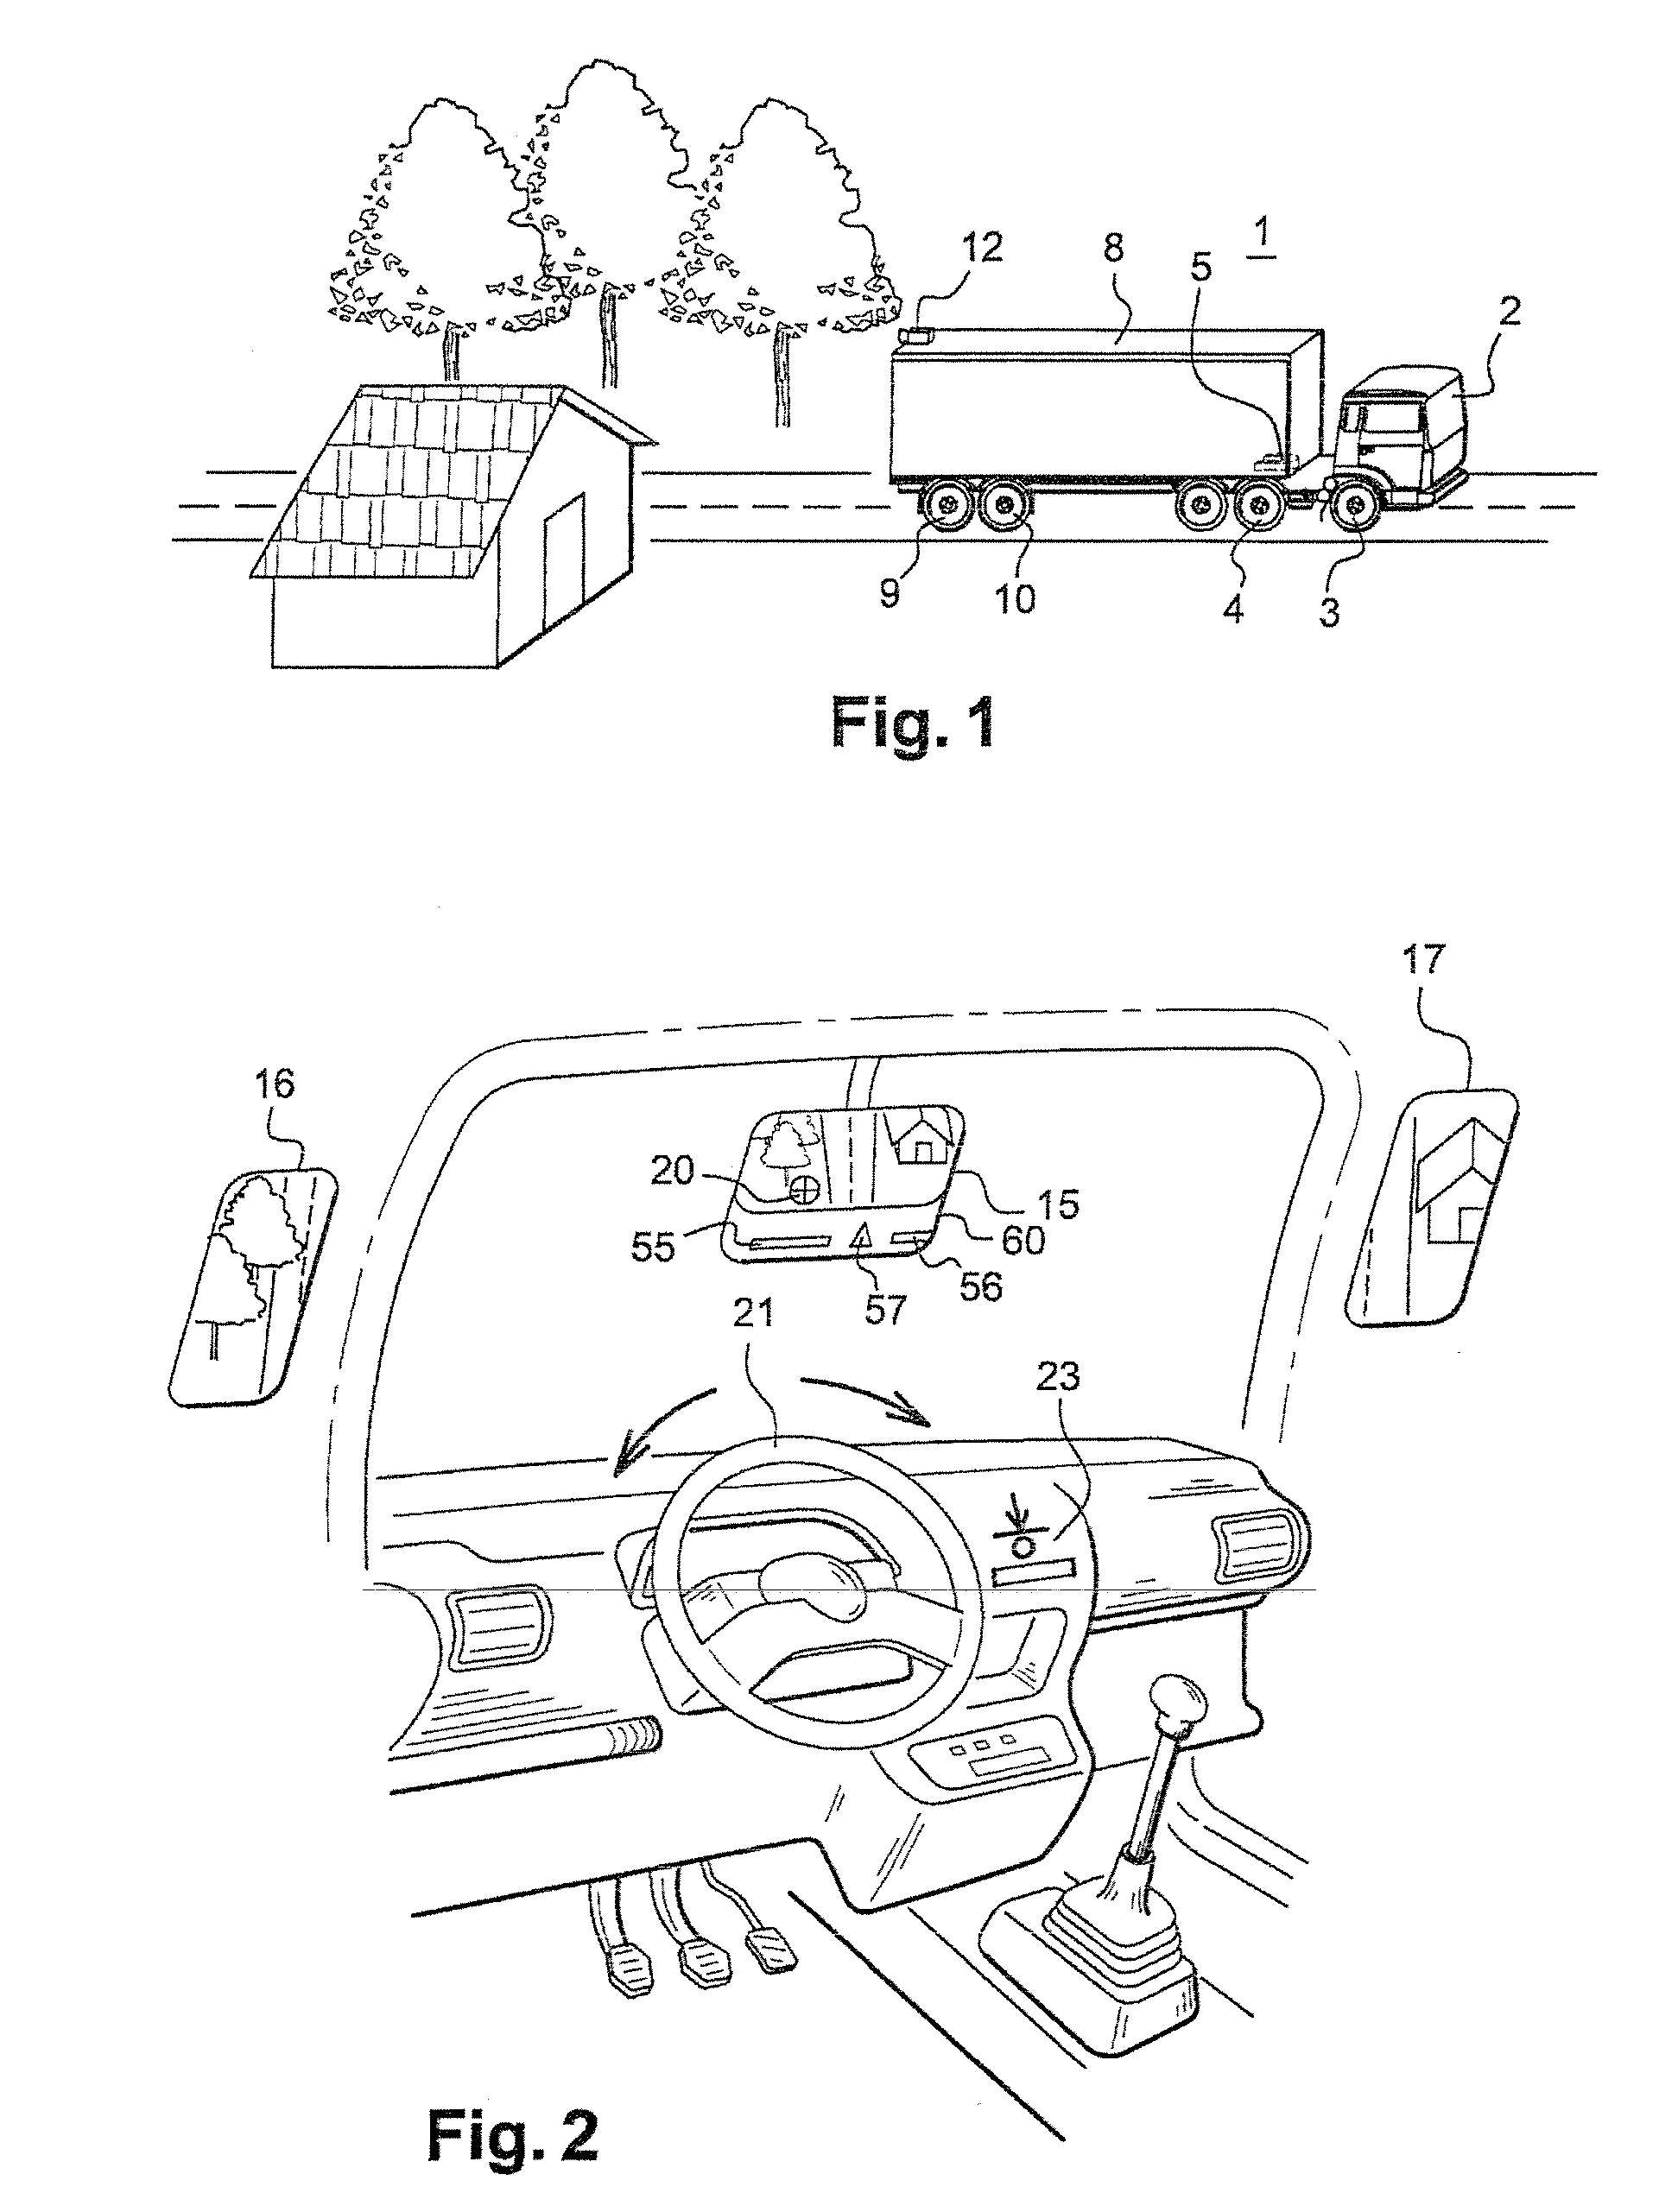 Drive Assisting Method for Reversal Path with Drawn Vehicle